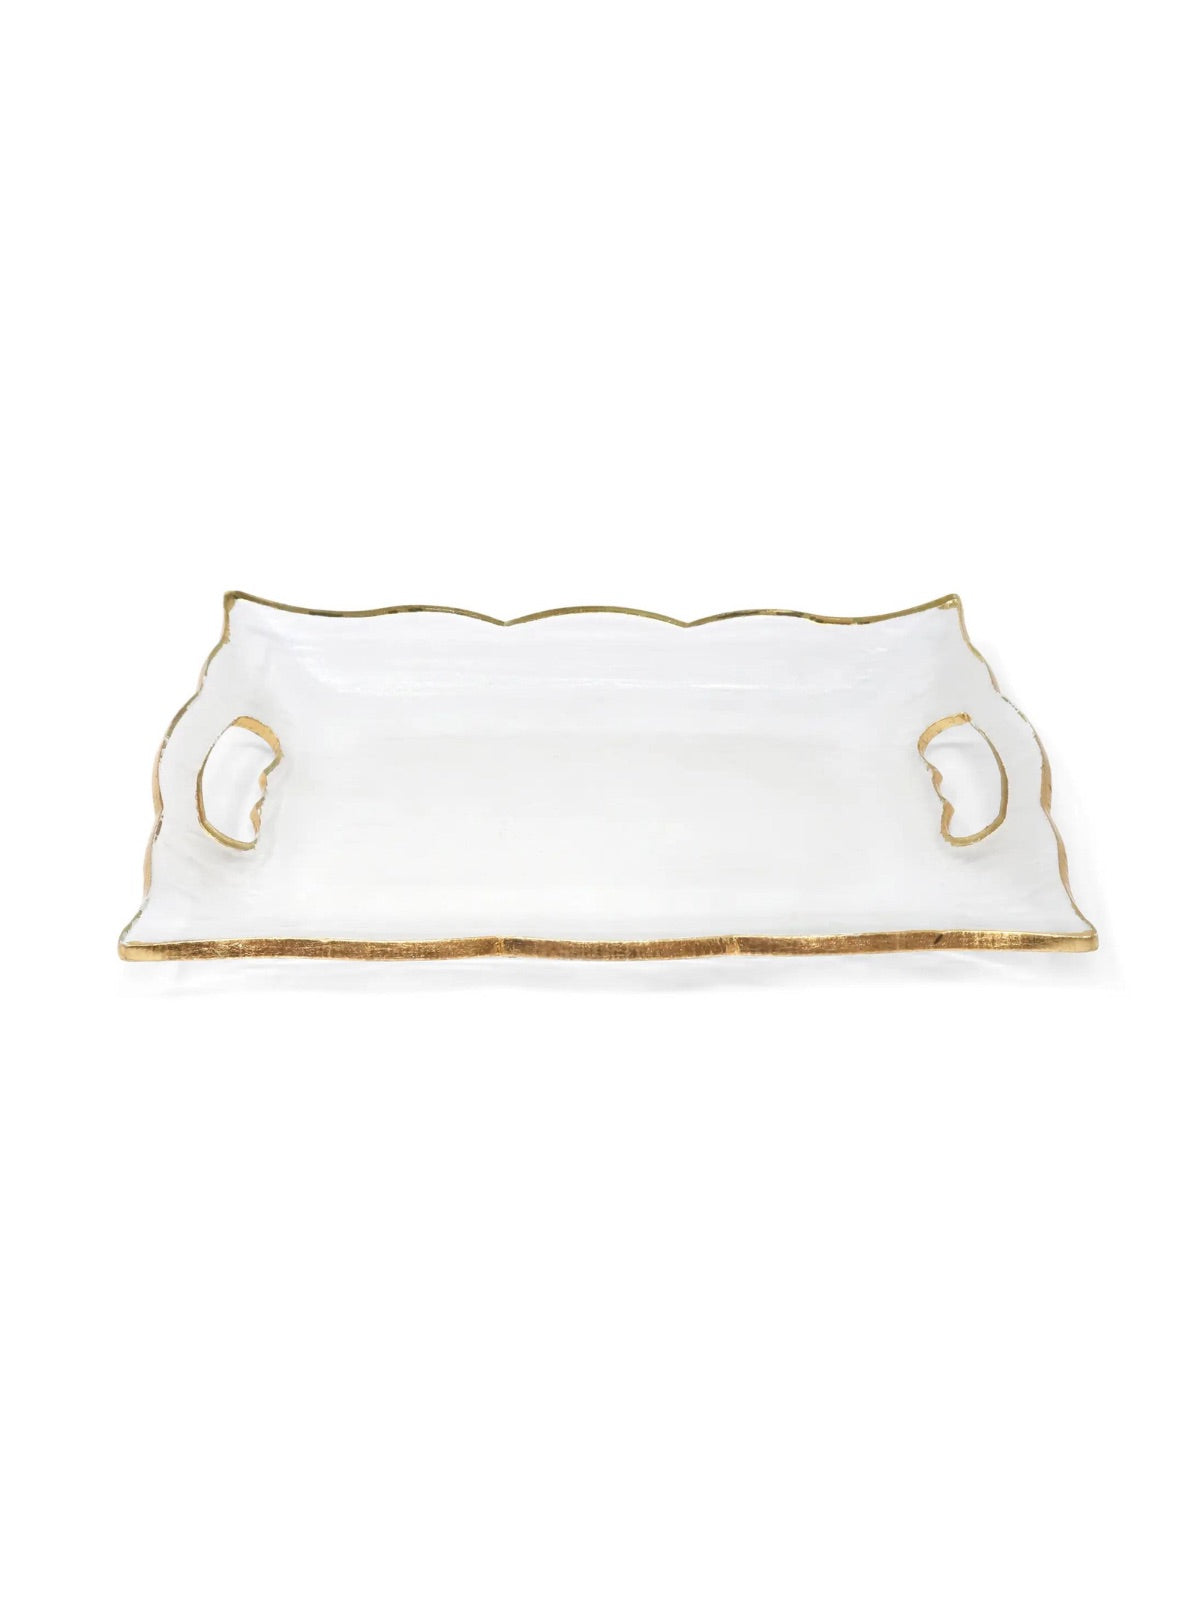 Rectangular Glass Tray with Handles and Metallic Gold Rim Available in 3 Sizes.